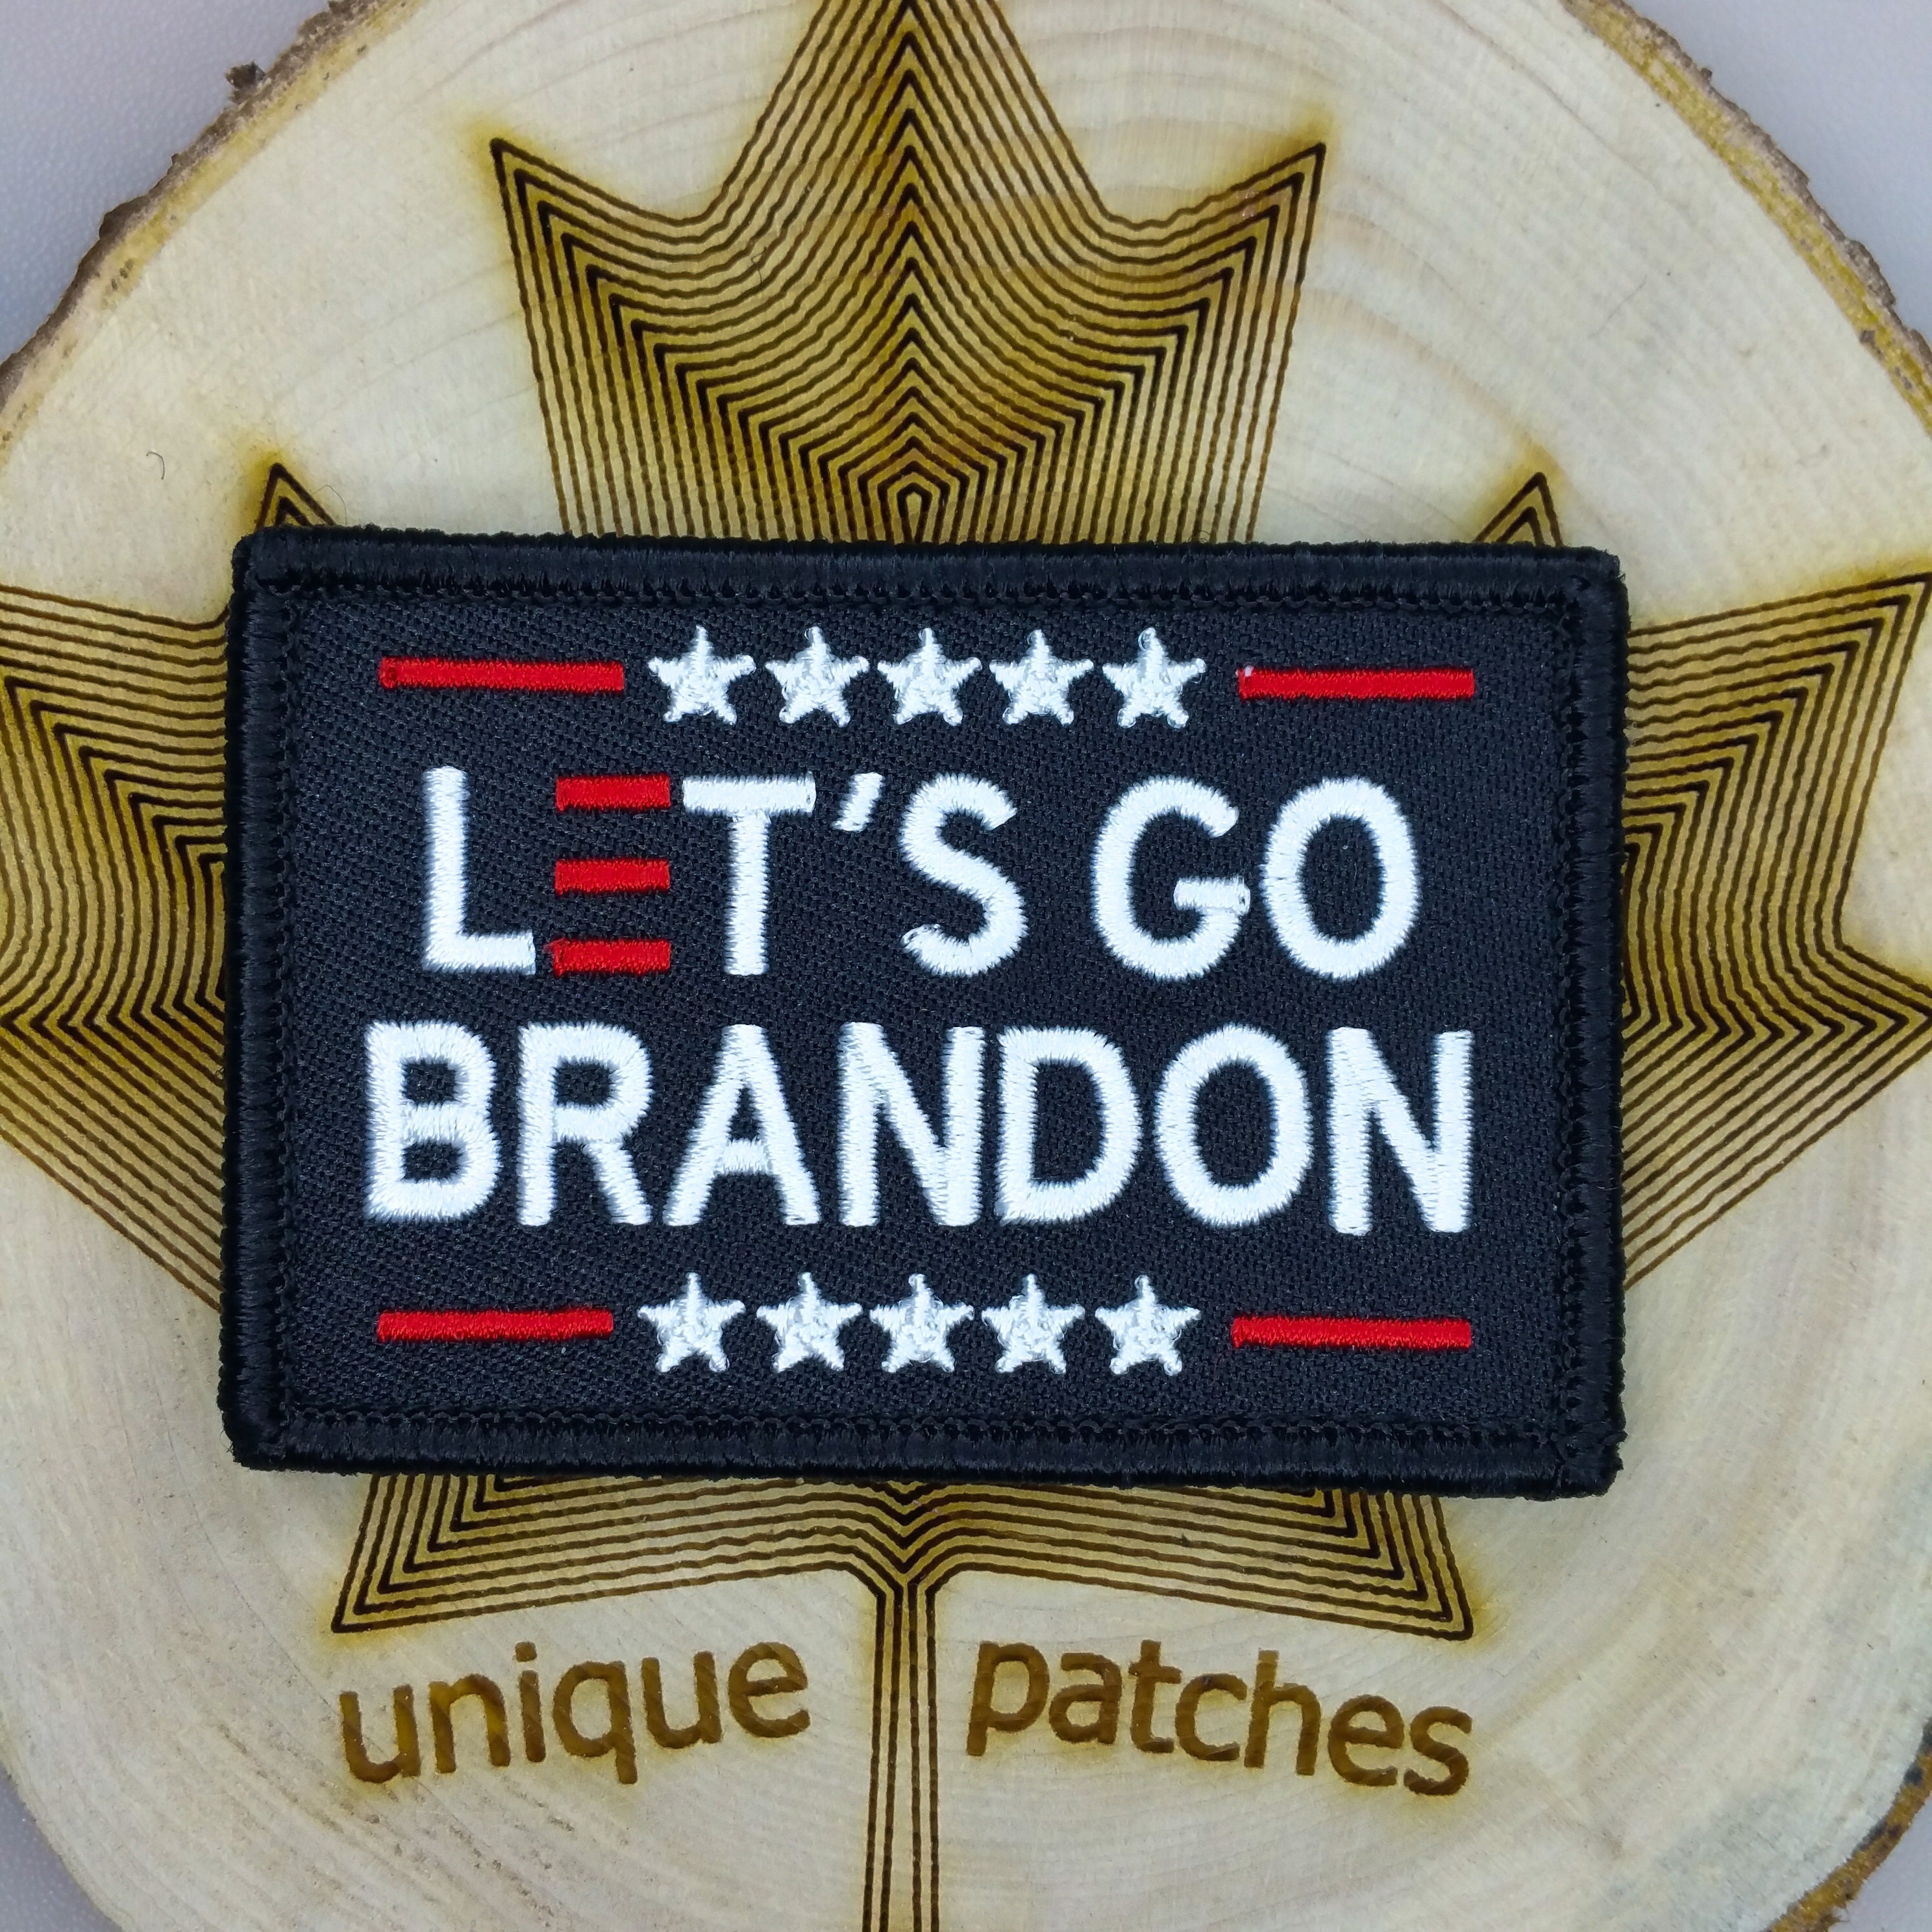 Let's Go Brandon Morale Patch -Made in The USA- Tactical Hook and Loop